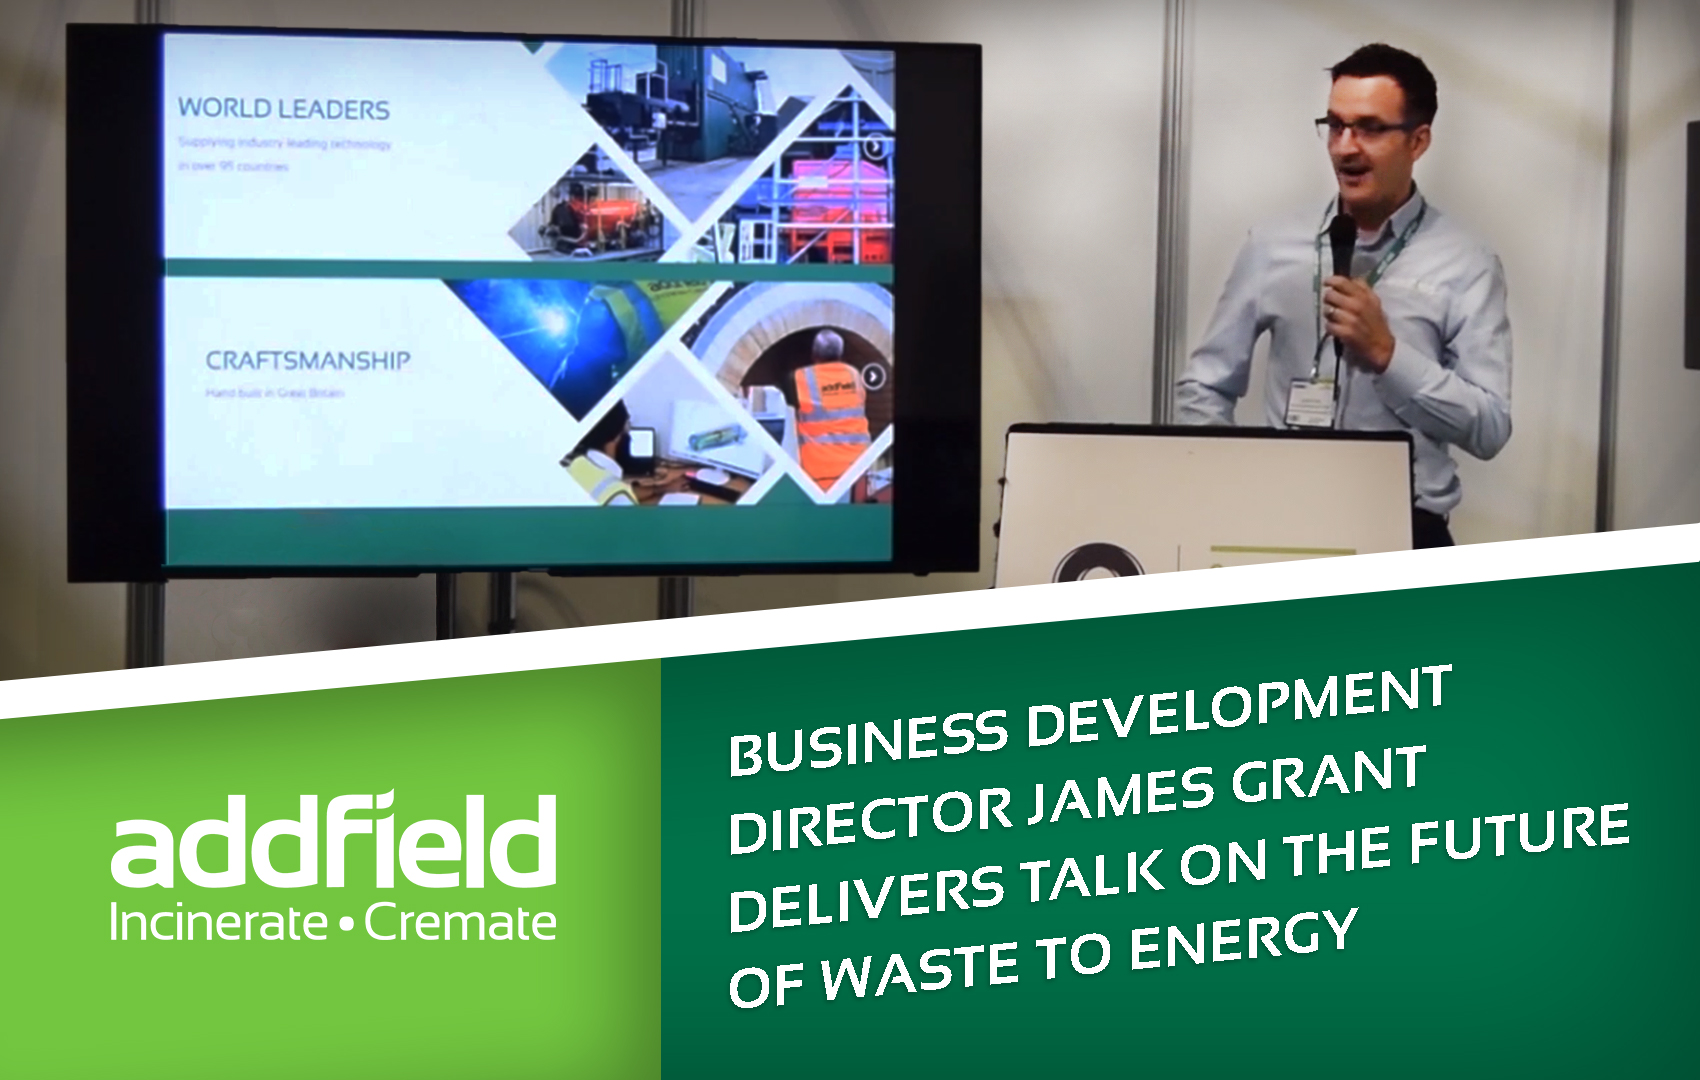 James Grant delivering a talk about Waste to energy